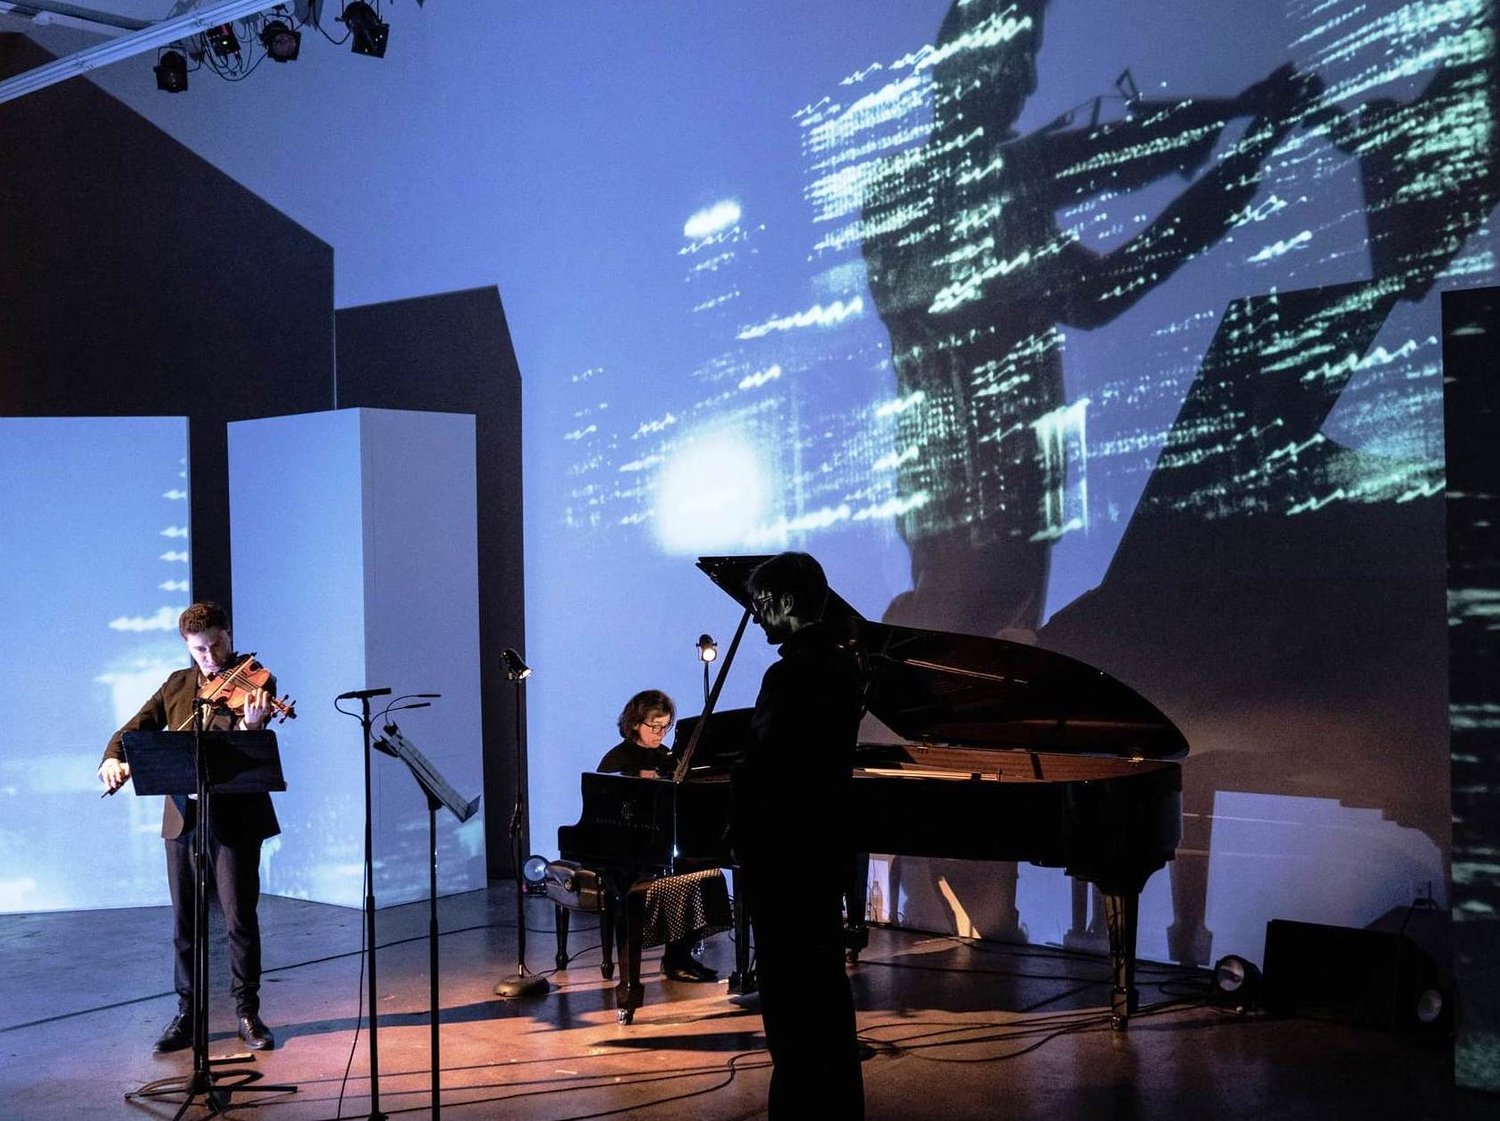 CreArtBox, an ensemble that marries classical and contemporary music with art and theatrical design, will present a multimedia show at 7 p.m. on October 8, at the Milford Theater.